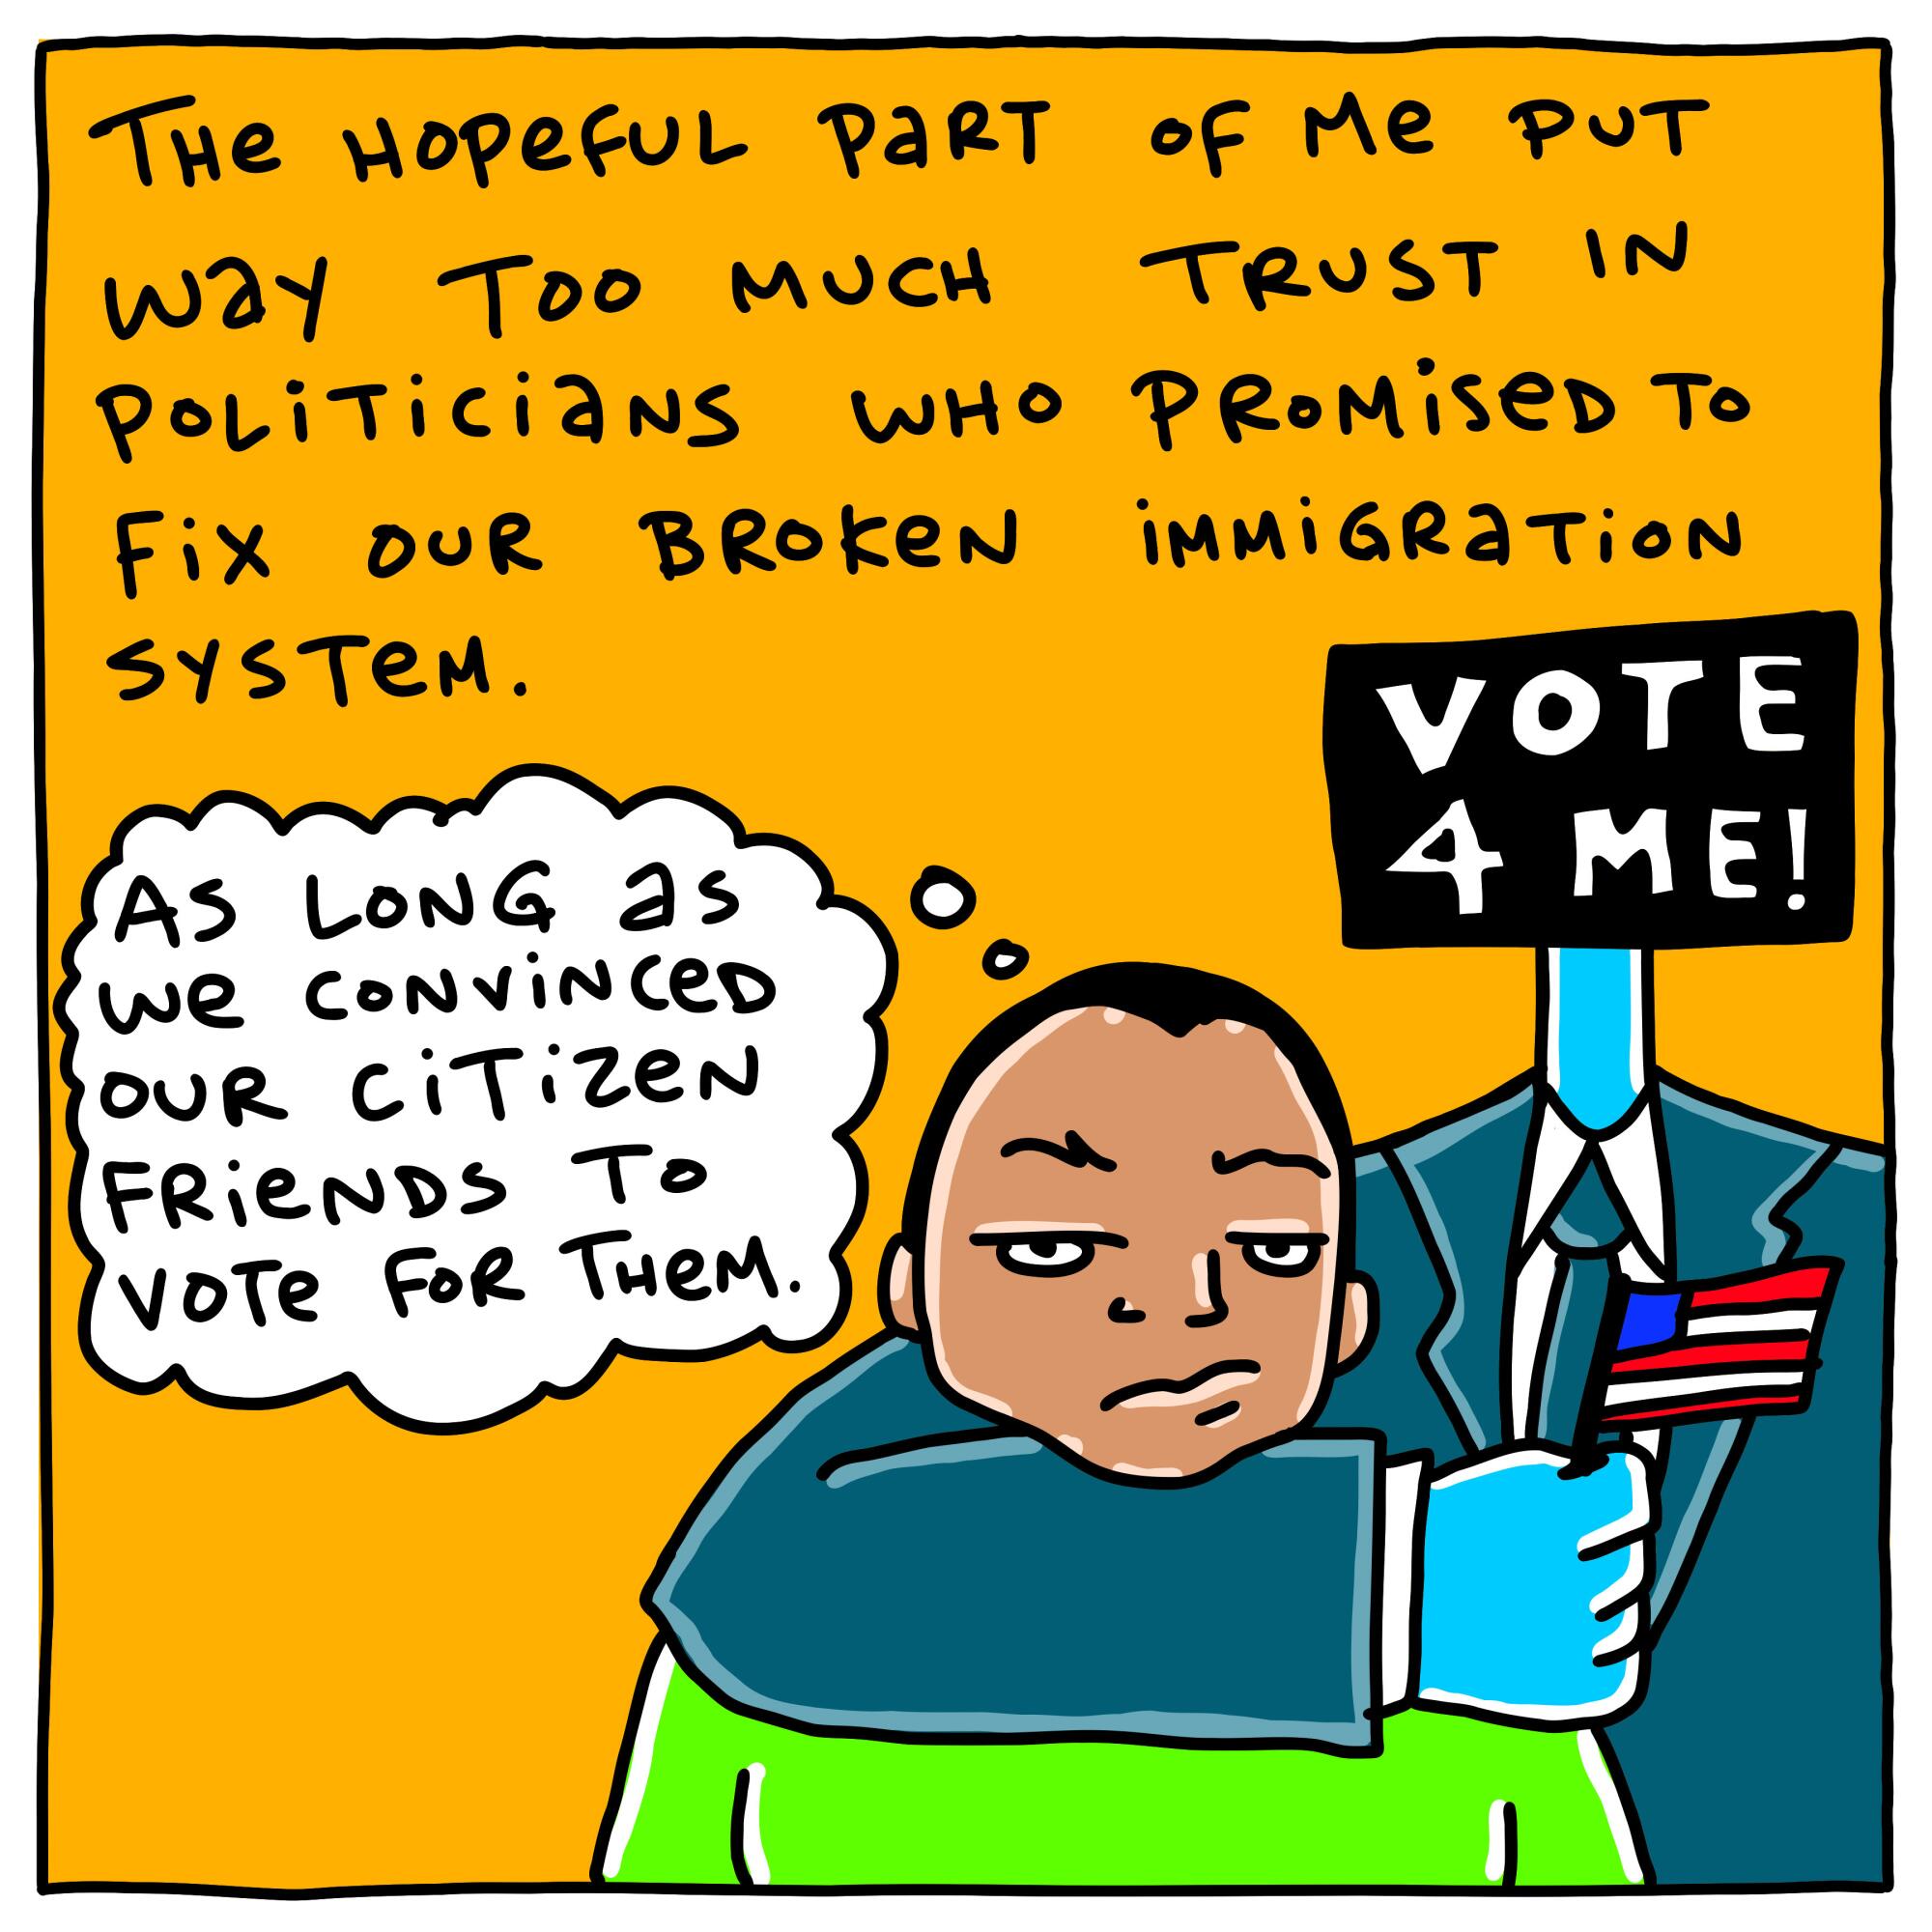 The hopeful part of me put too much trust in politicians who promised to fix our broken system. 